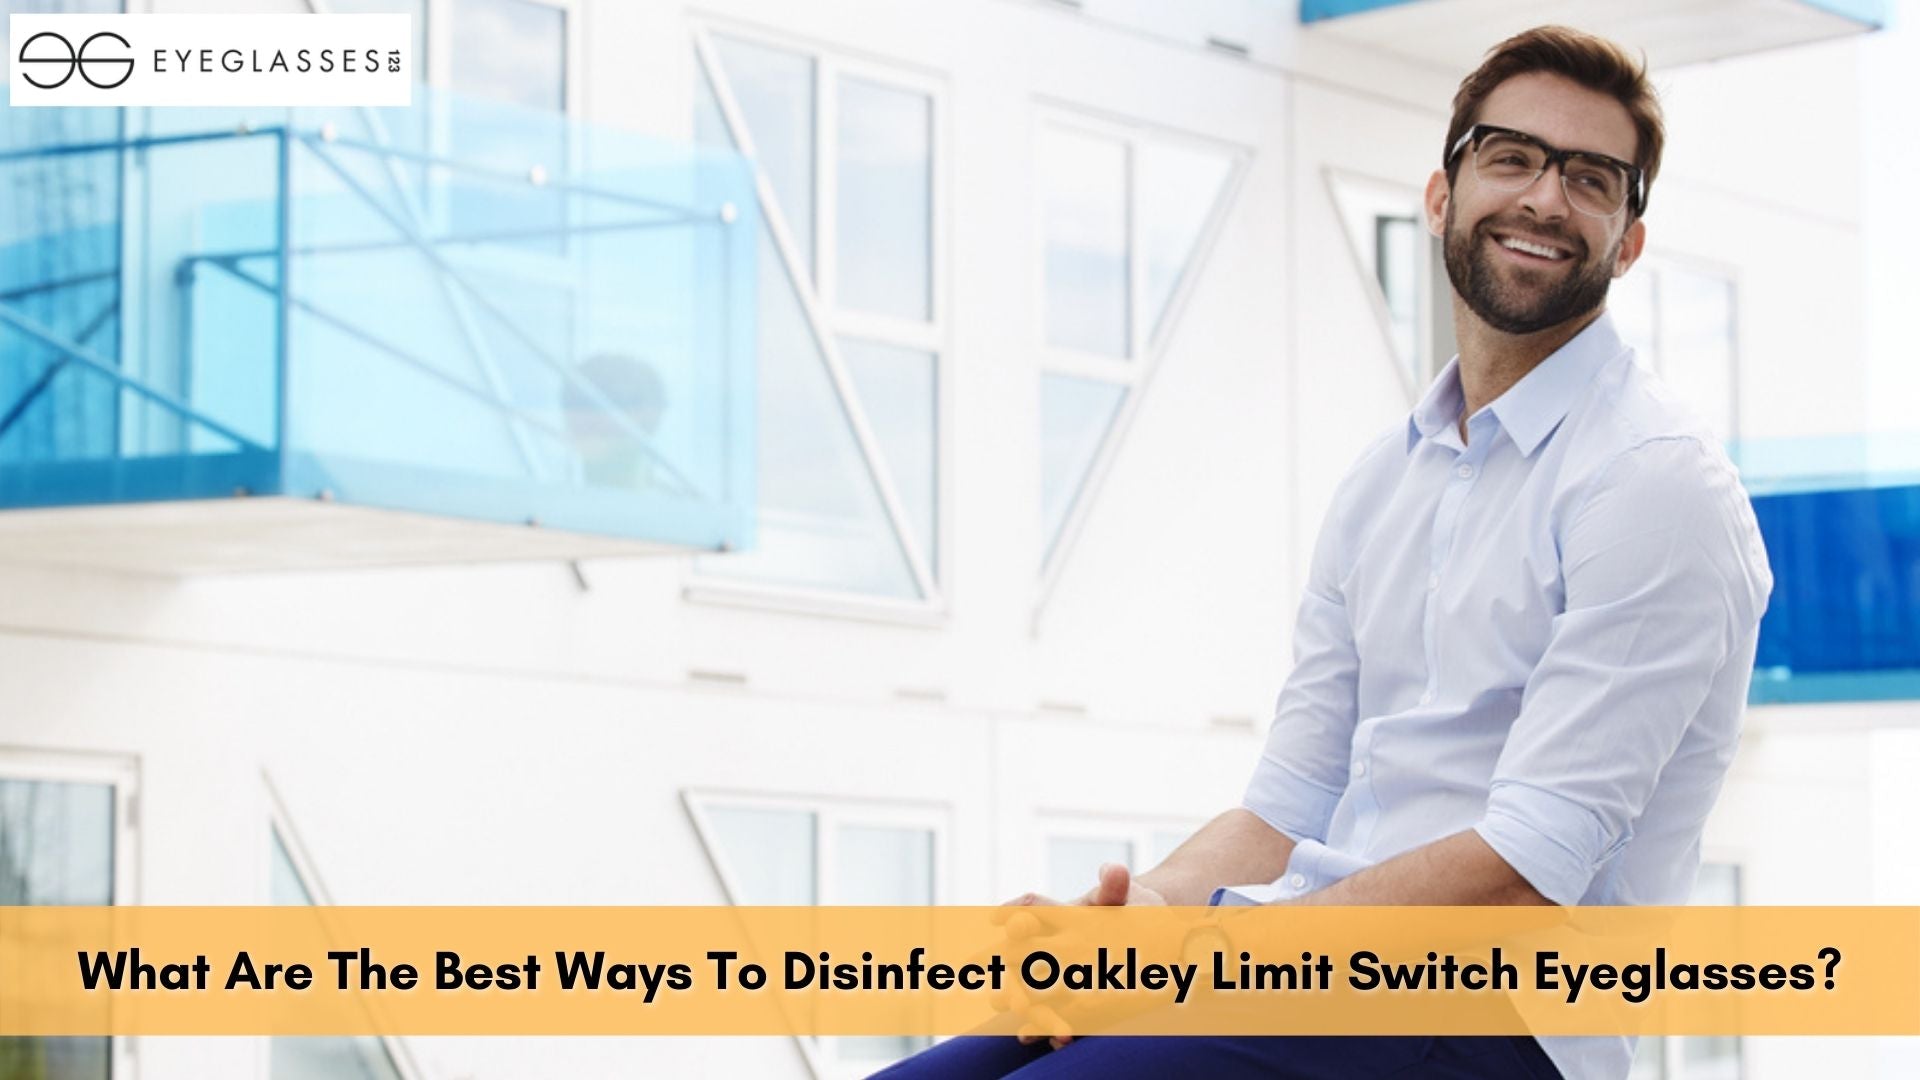 What Are The Best Ways To Disinfect Oakley Limit Switch Eyeglasses?